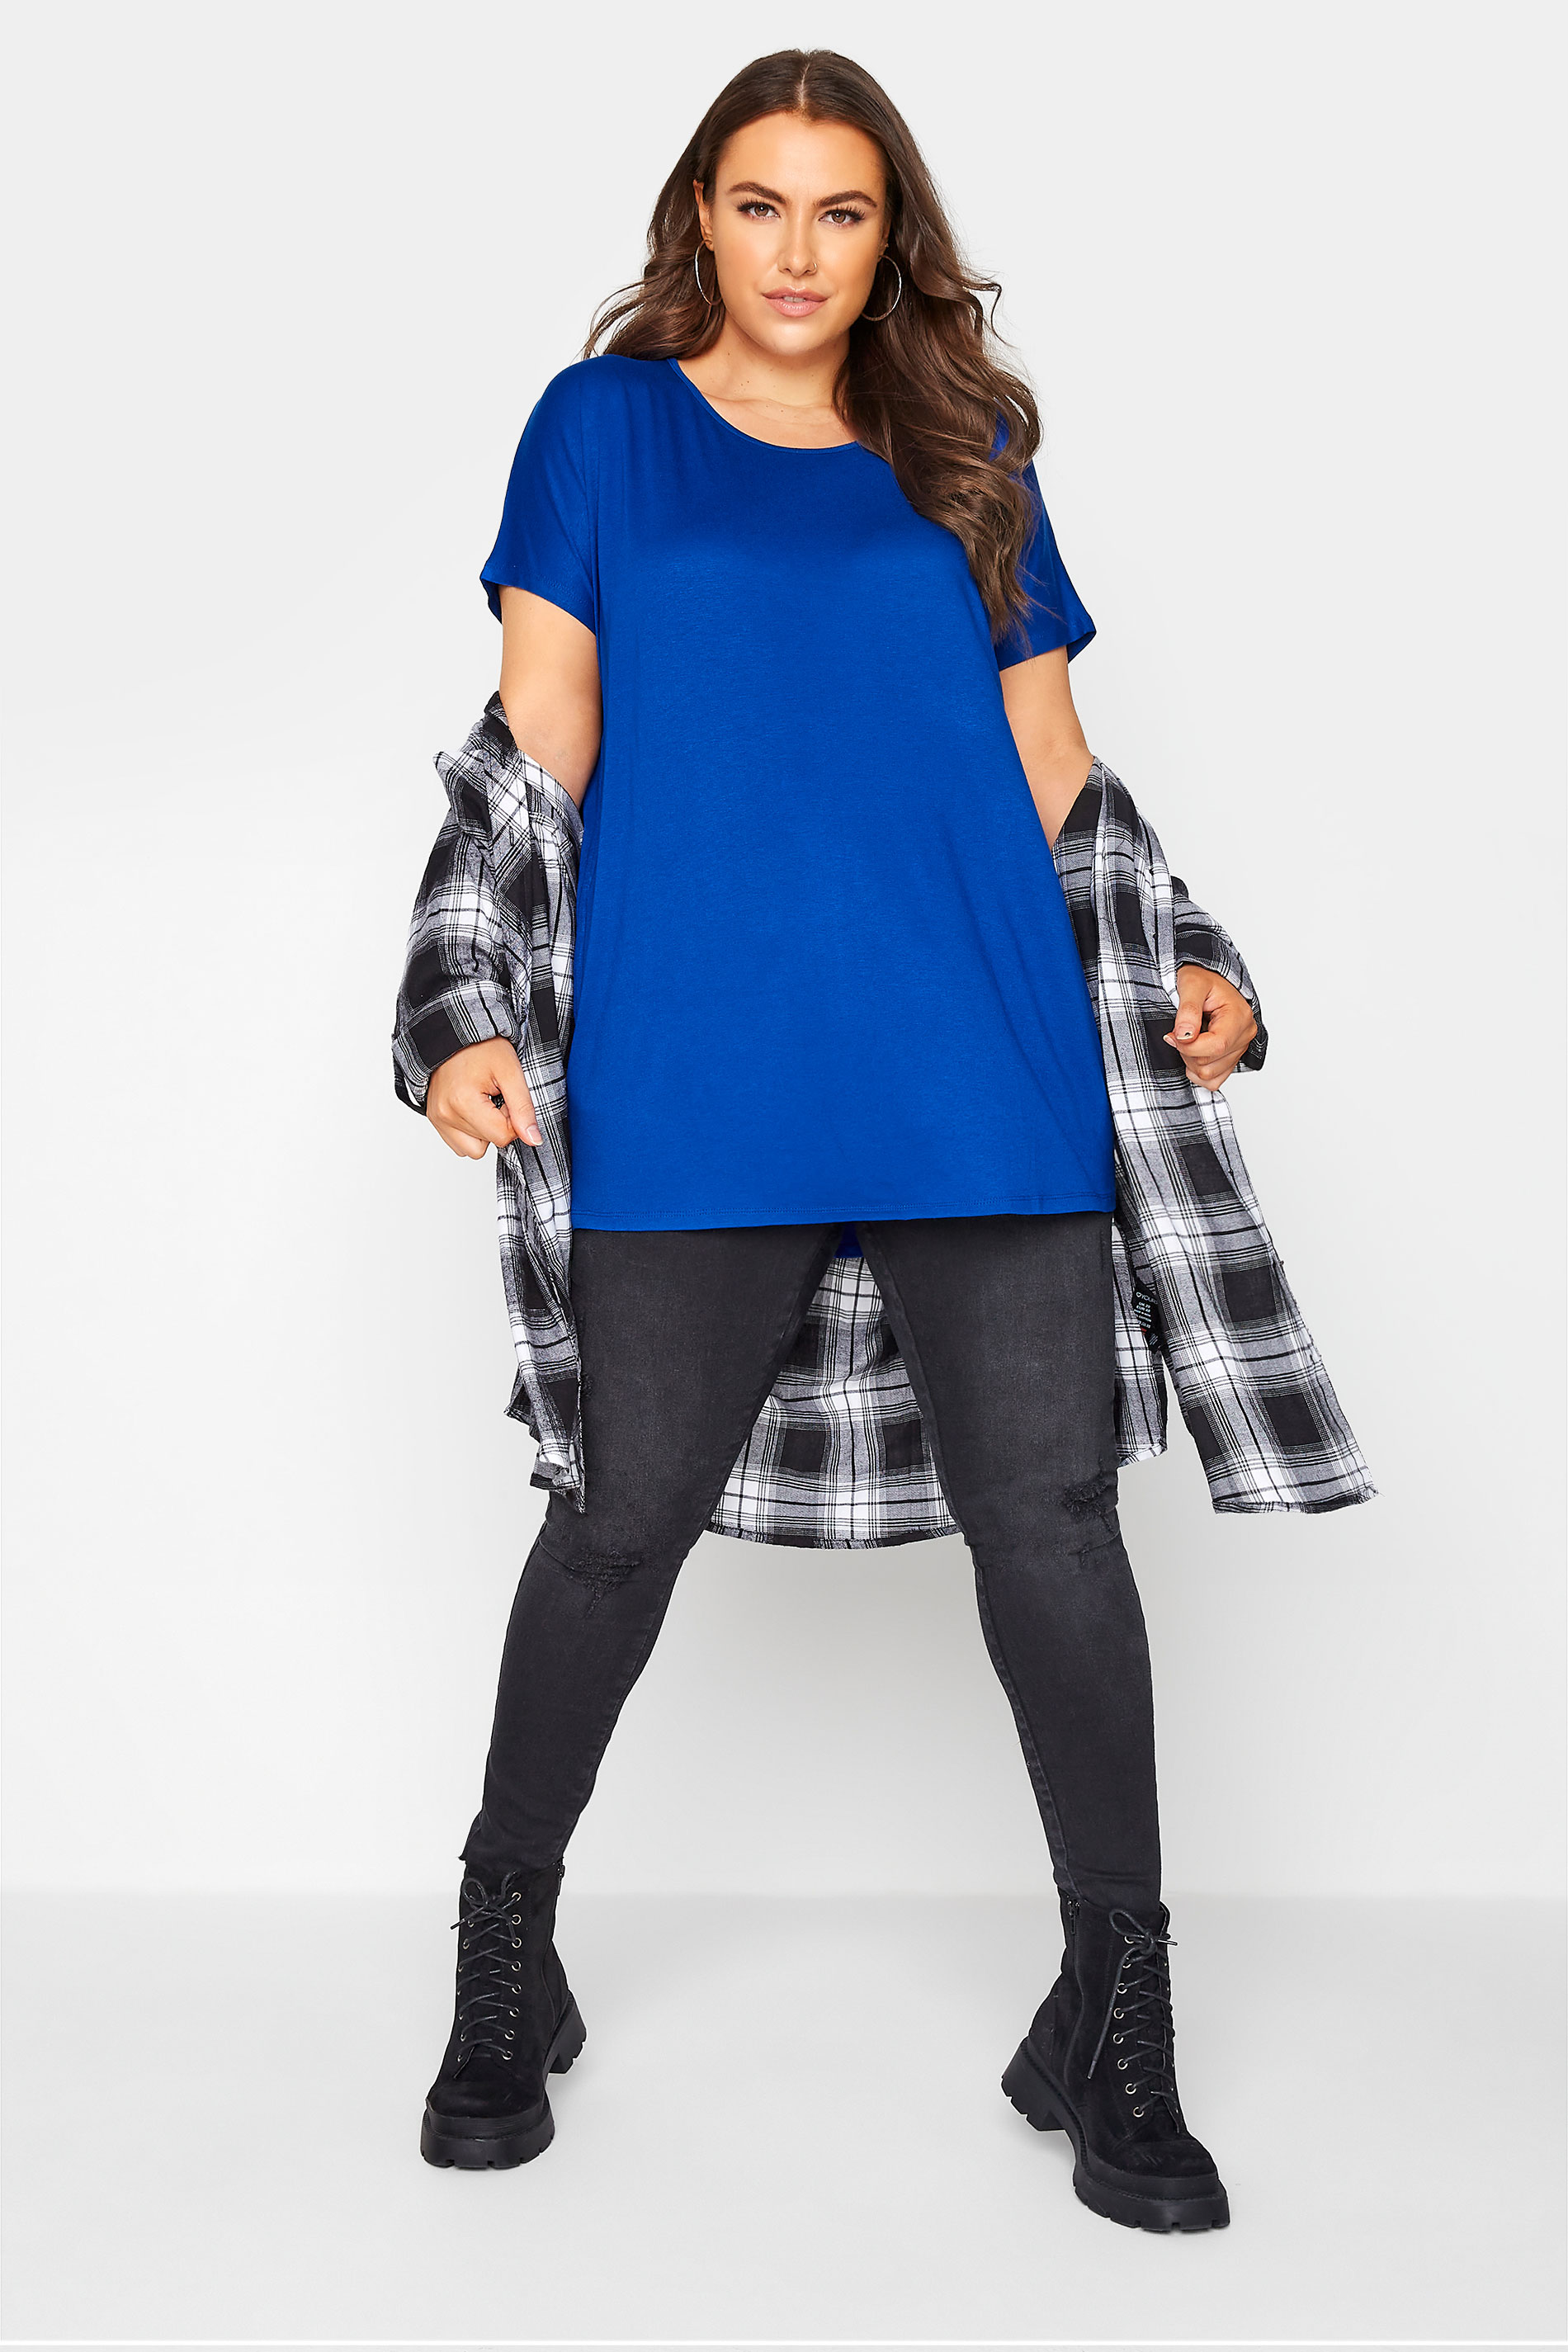 Grande taille  Tops Grande taille  T-Shirts | T-Shirt Bleu Roi Ourlet Plongeant - RT60090